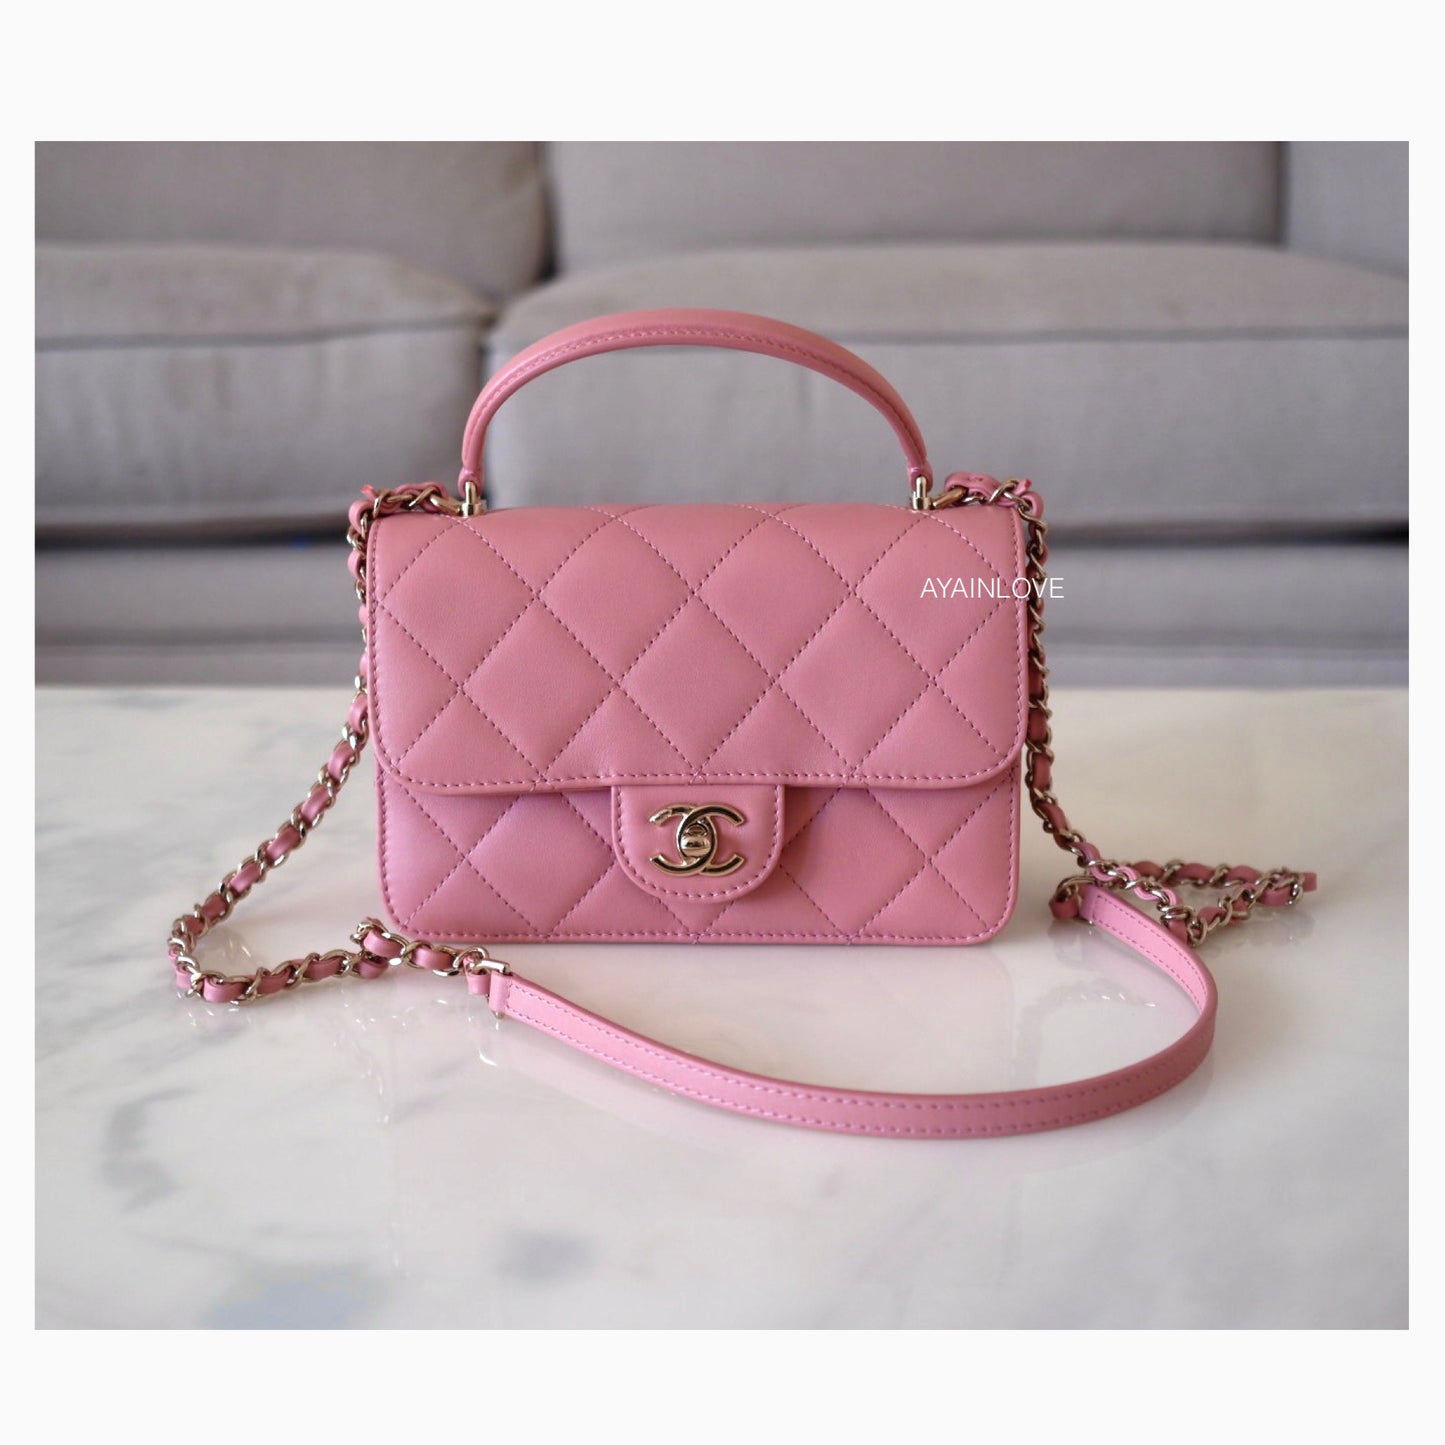 Chanel classic flap bag hot pink small  Chanel mini flap bag, Pink chanel  bag, Chanel classic flap bag